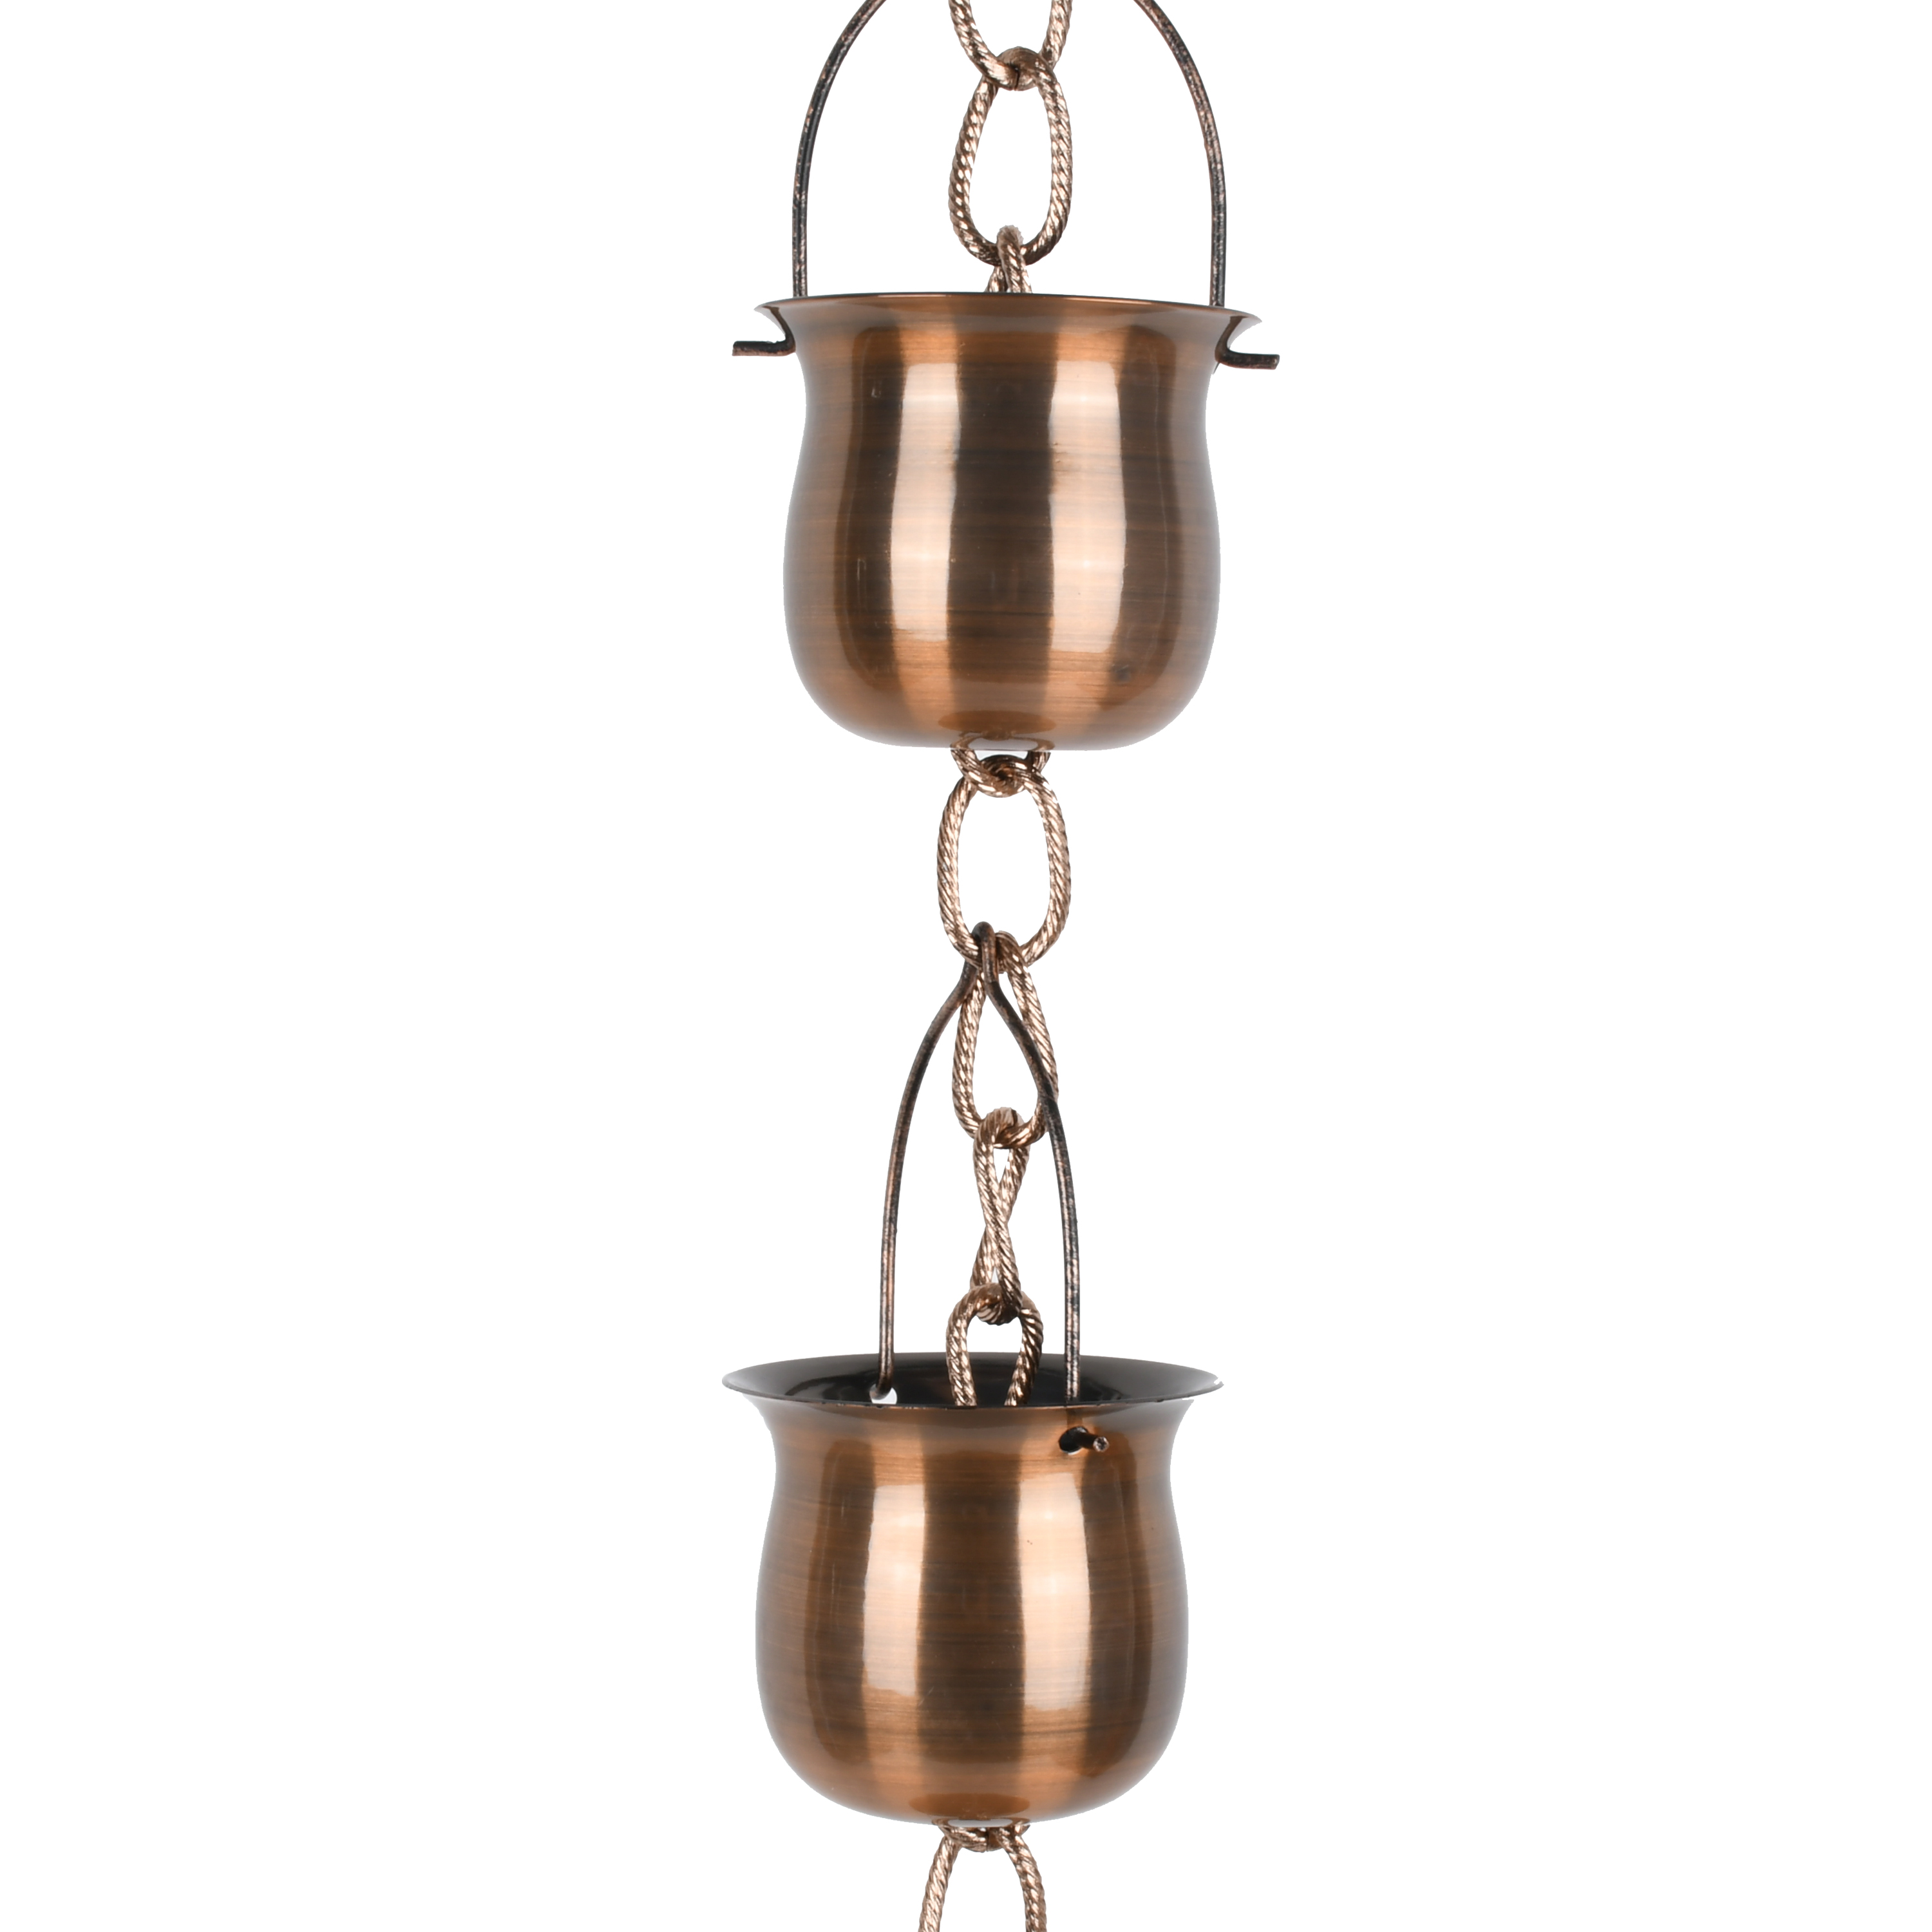 Mainstays Outdoor 29" Metal Weathered Copper Rain Chain